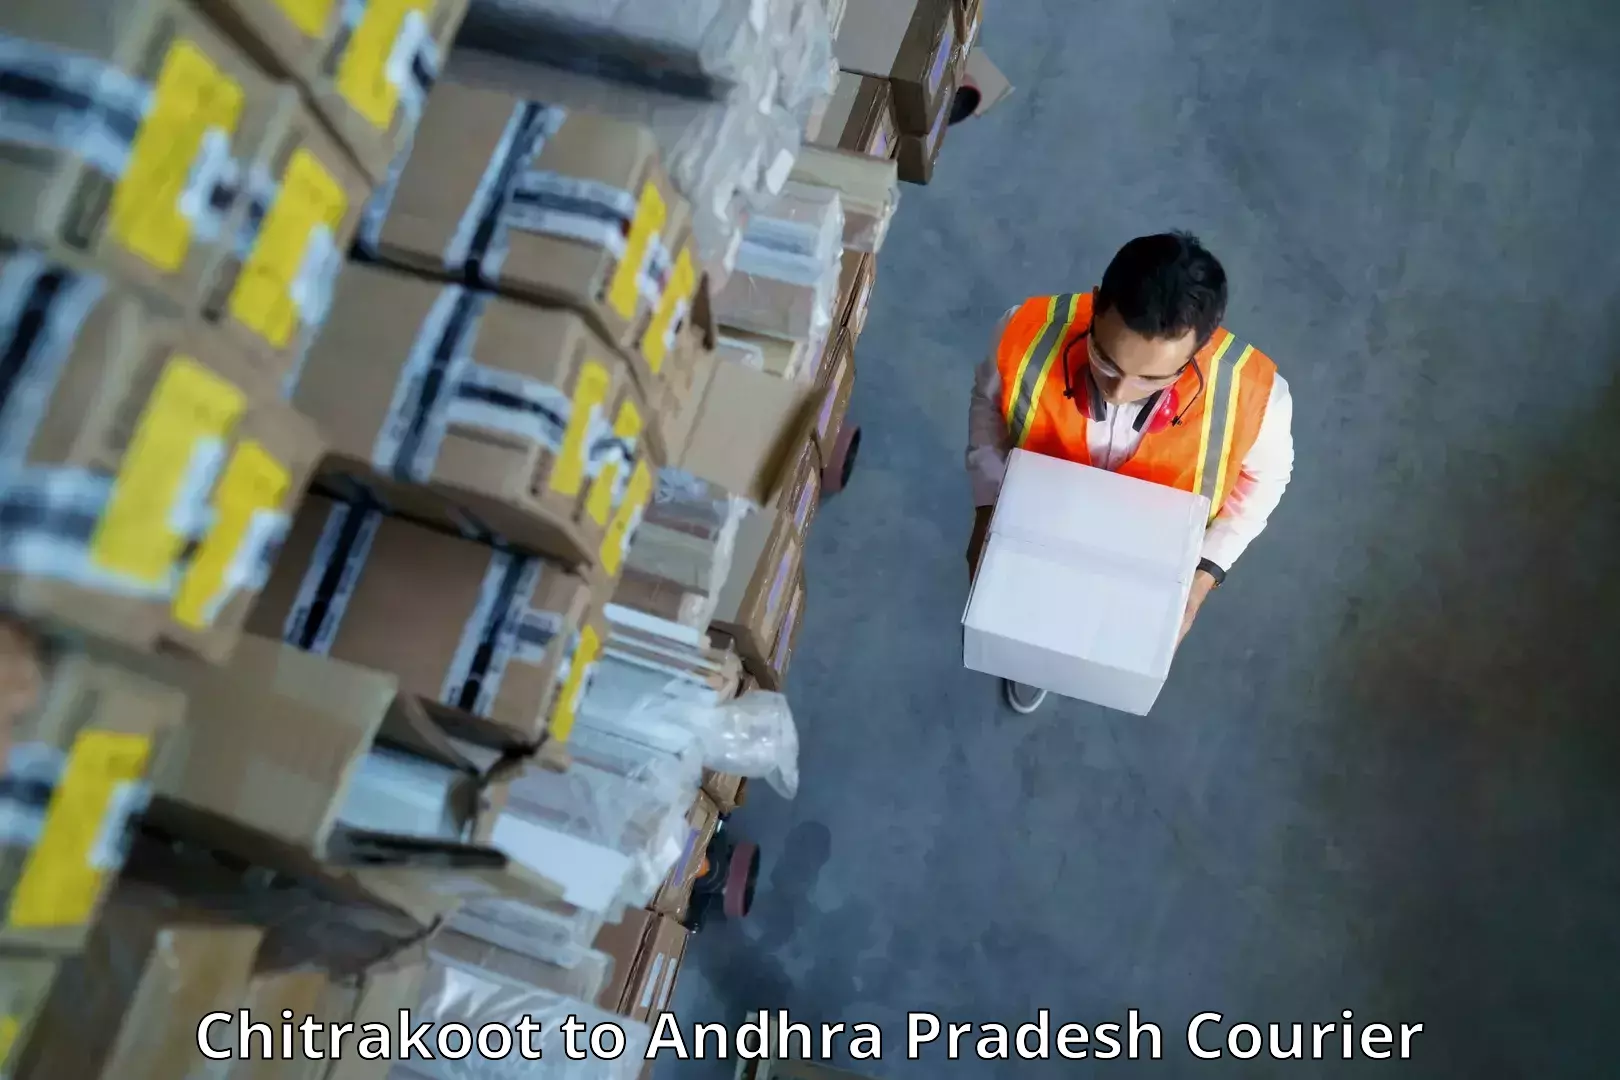 On-call courier service Chitrakoot to Gudivada